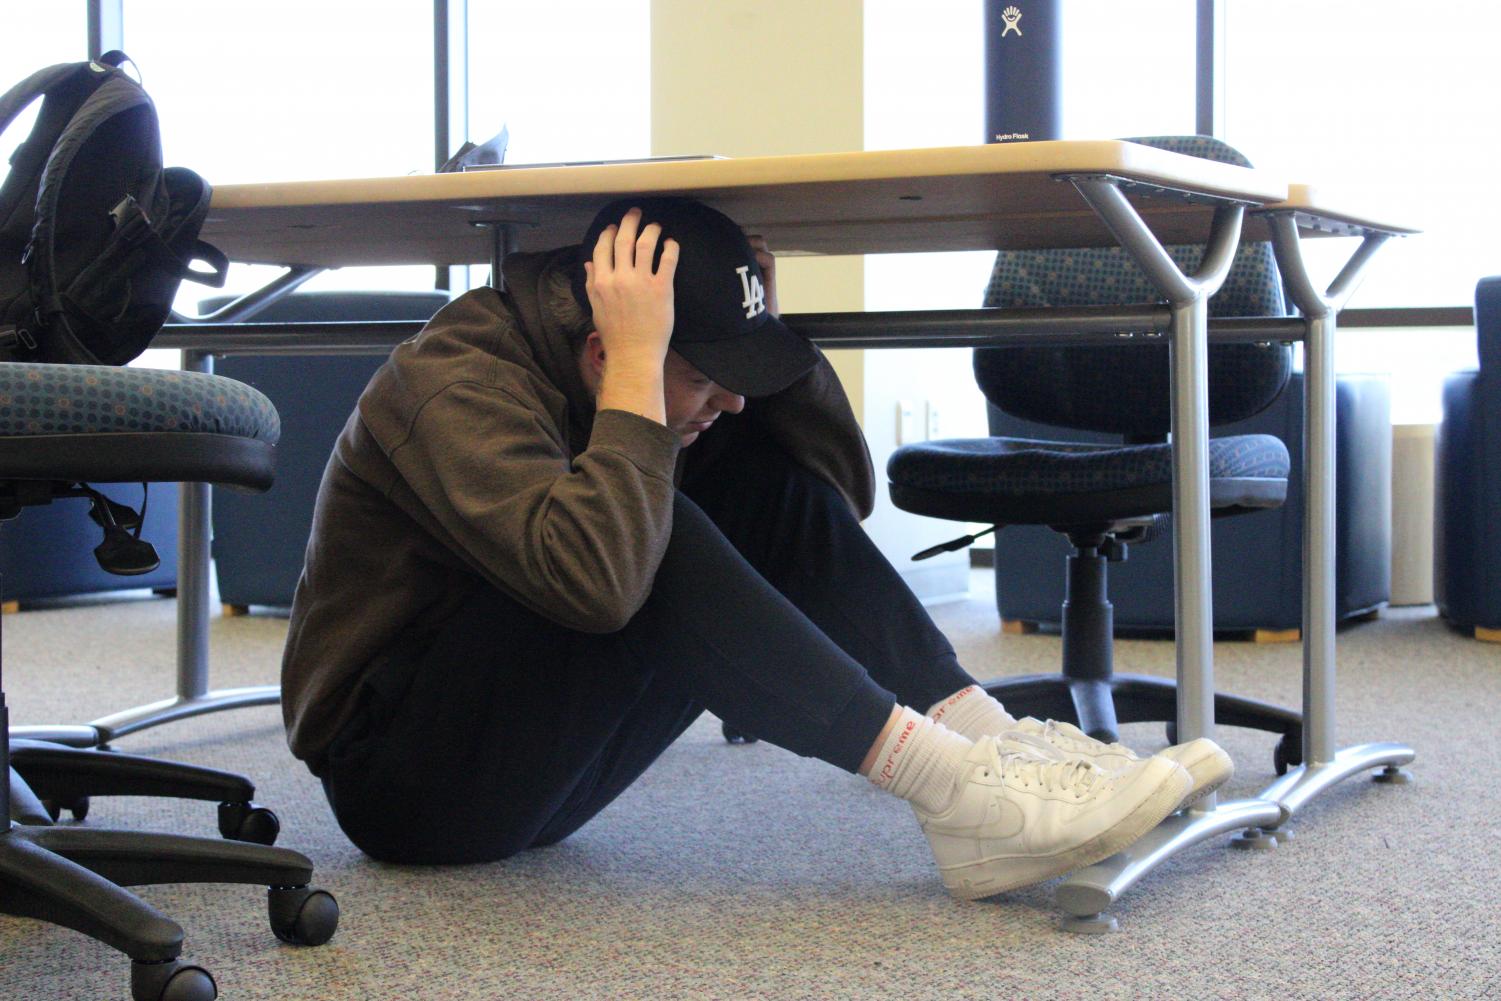 Freshmen Ash Noorzay covers his head as he ducks under a desk in the college library. Immediately following the earthquake drill an evacuation from the building into open space took place.